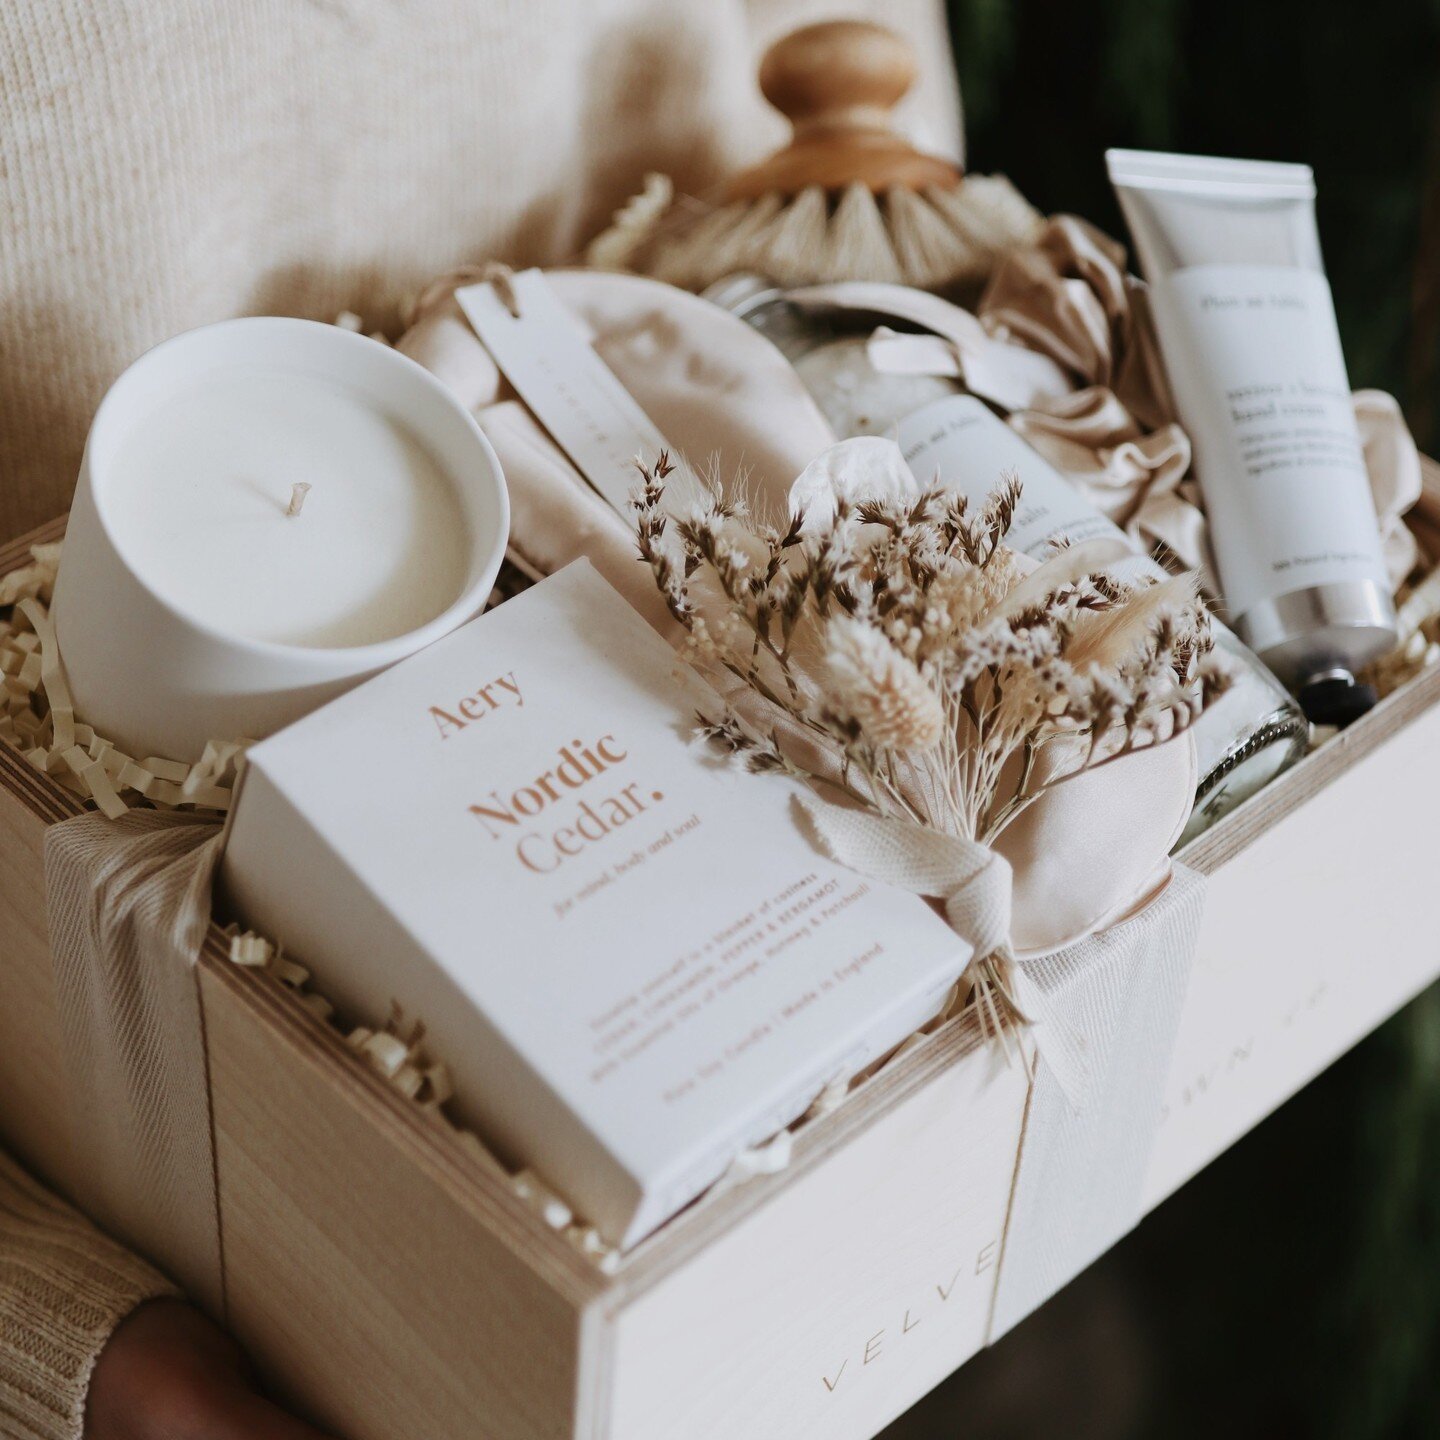 The ultimate box of relaxation. 

Don&rsquo;t forget we are still offering 15% off our gift boxes with COUNTDOWN15 
.
.
.
📸 @t.hendersonphotography
#velvetbrowncogifts #christmasgift #christmasgiftideas #giftboxes #giftboxuk #giftboxesuk #giftboxcus